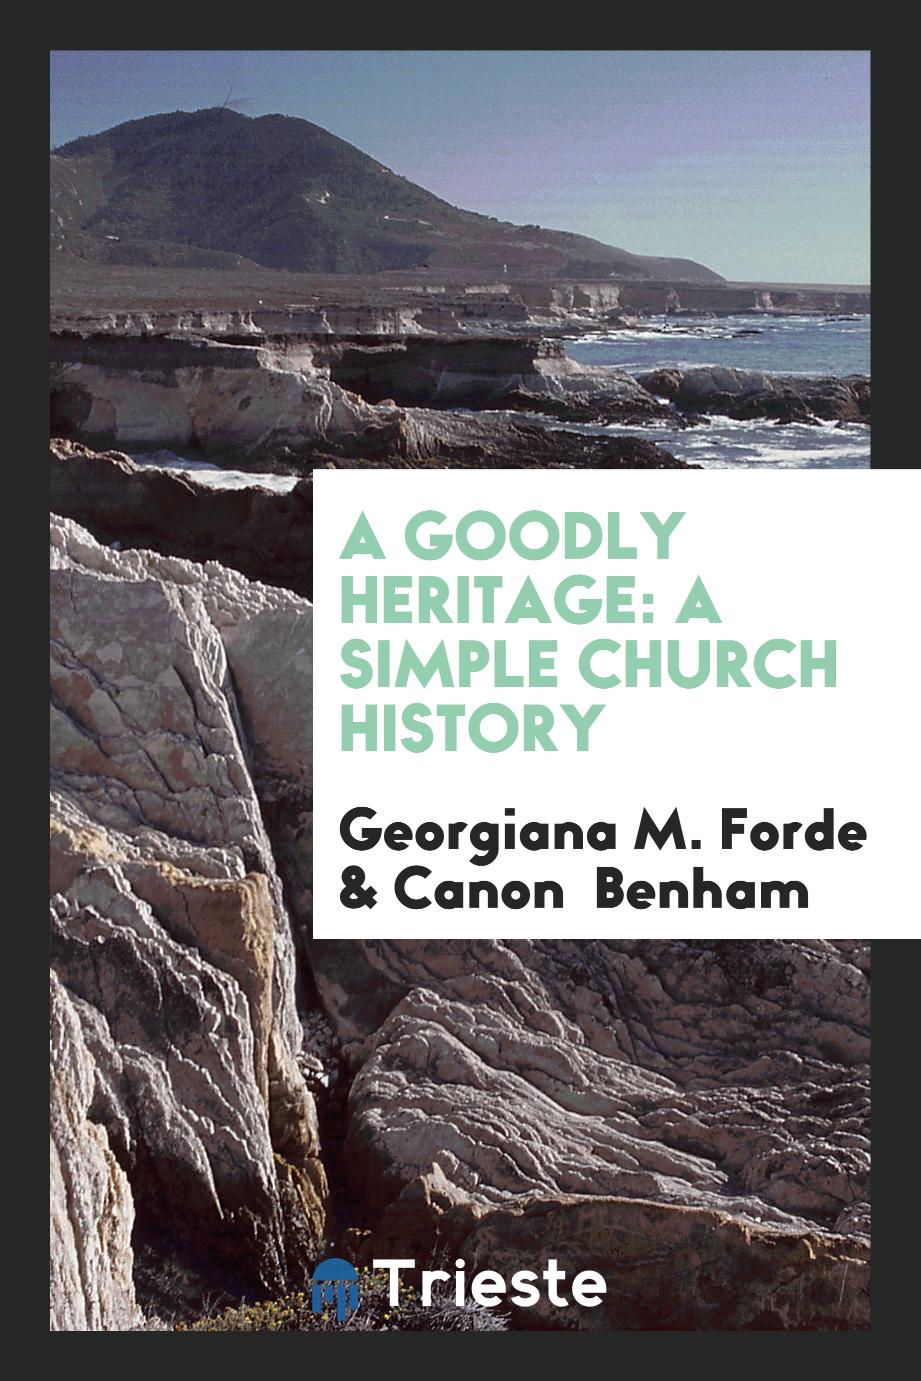 A Goodly Heritage: A Simple Church History